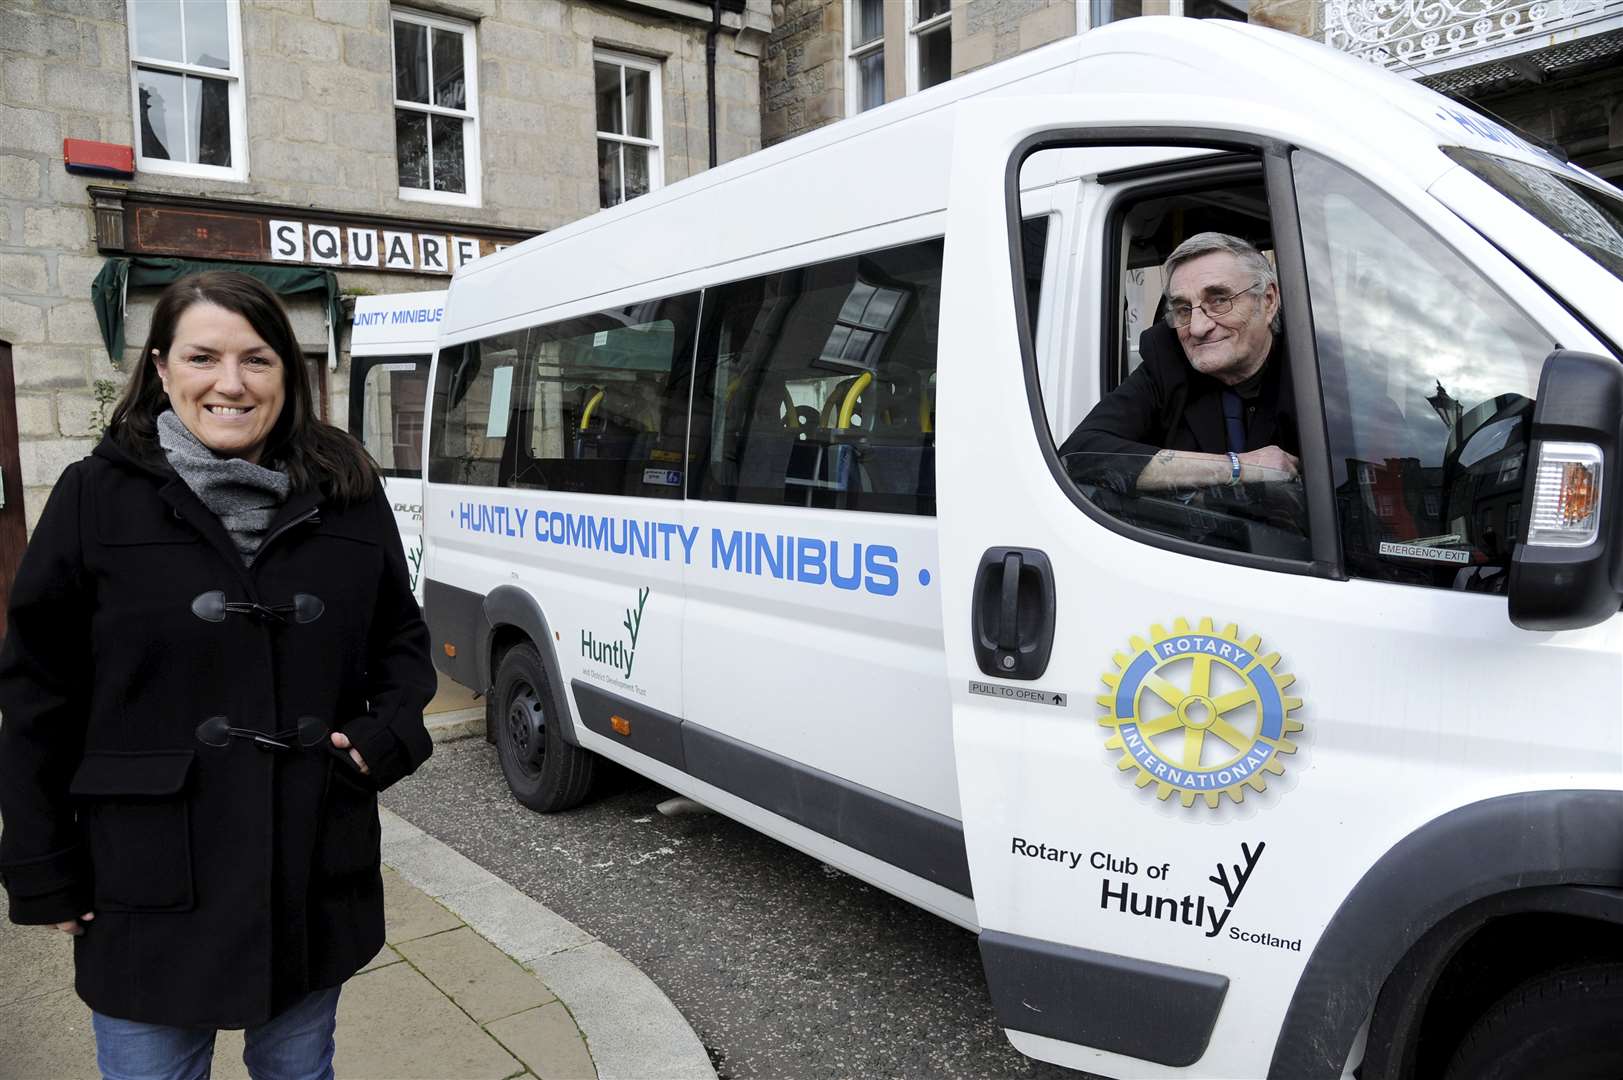 Norman Kinnaird (right) in his rightful place behind the wheel of the Huntly Community Minibus, with minibus coordinator Debbie Haefner.